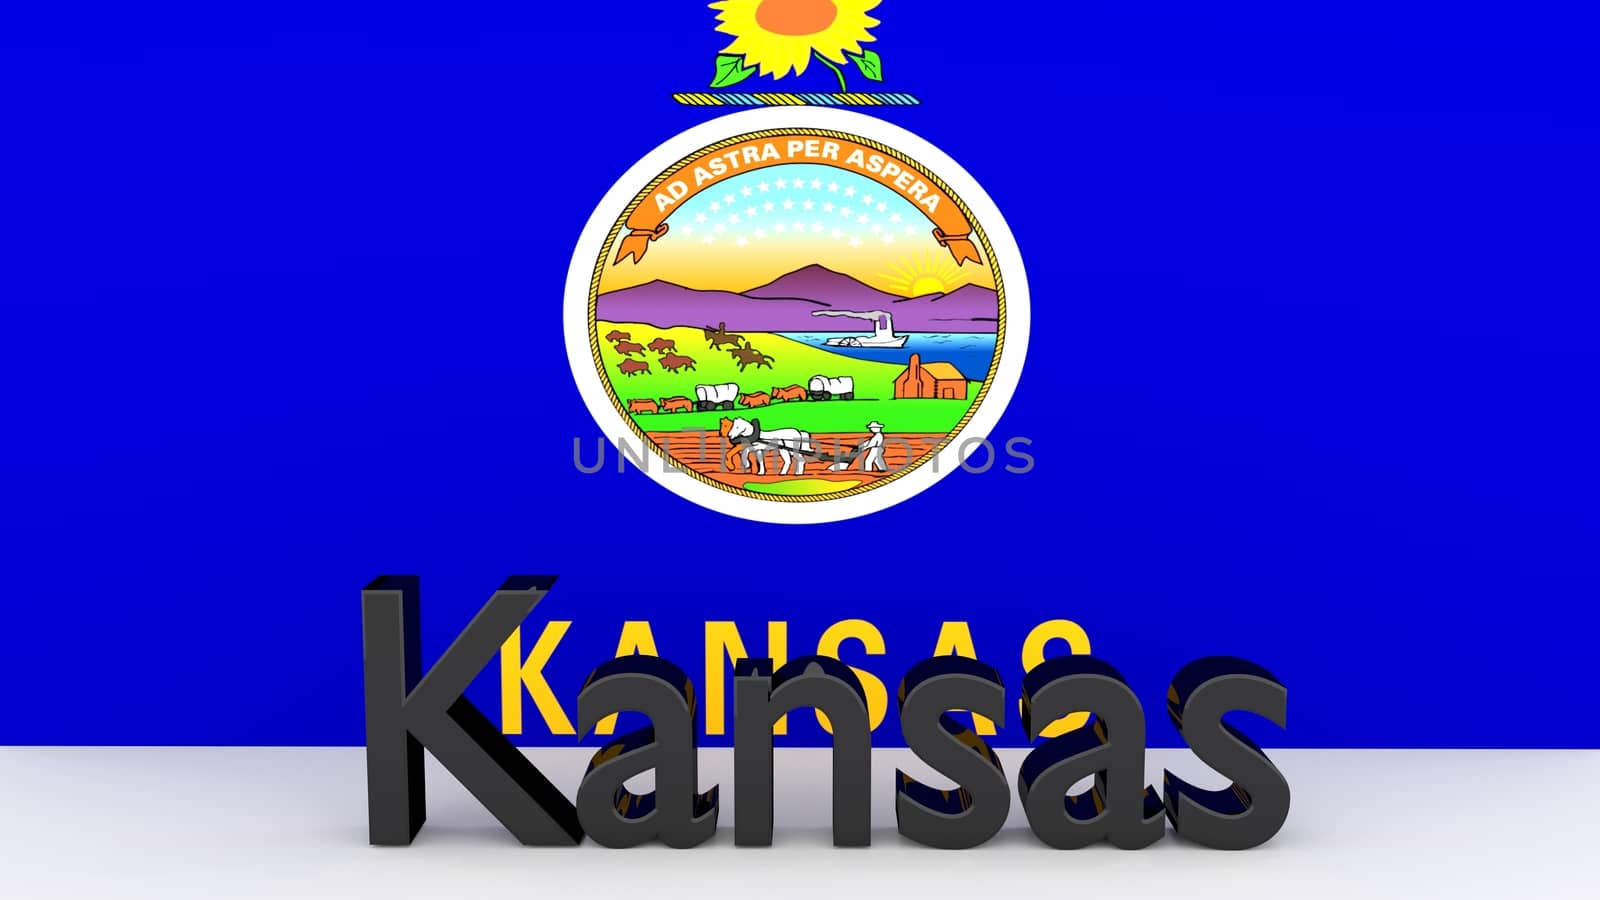 US state Kansas, metal name in front of flag by MarkDw